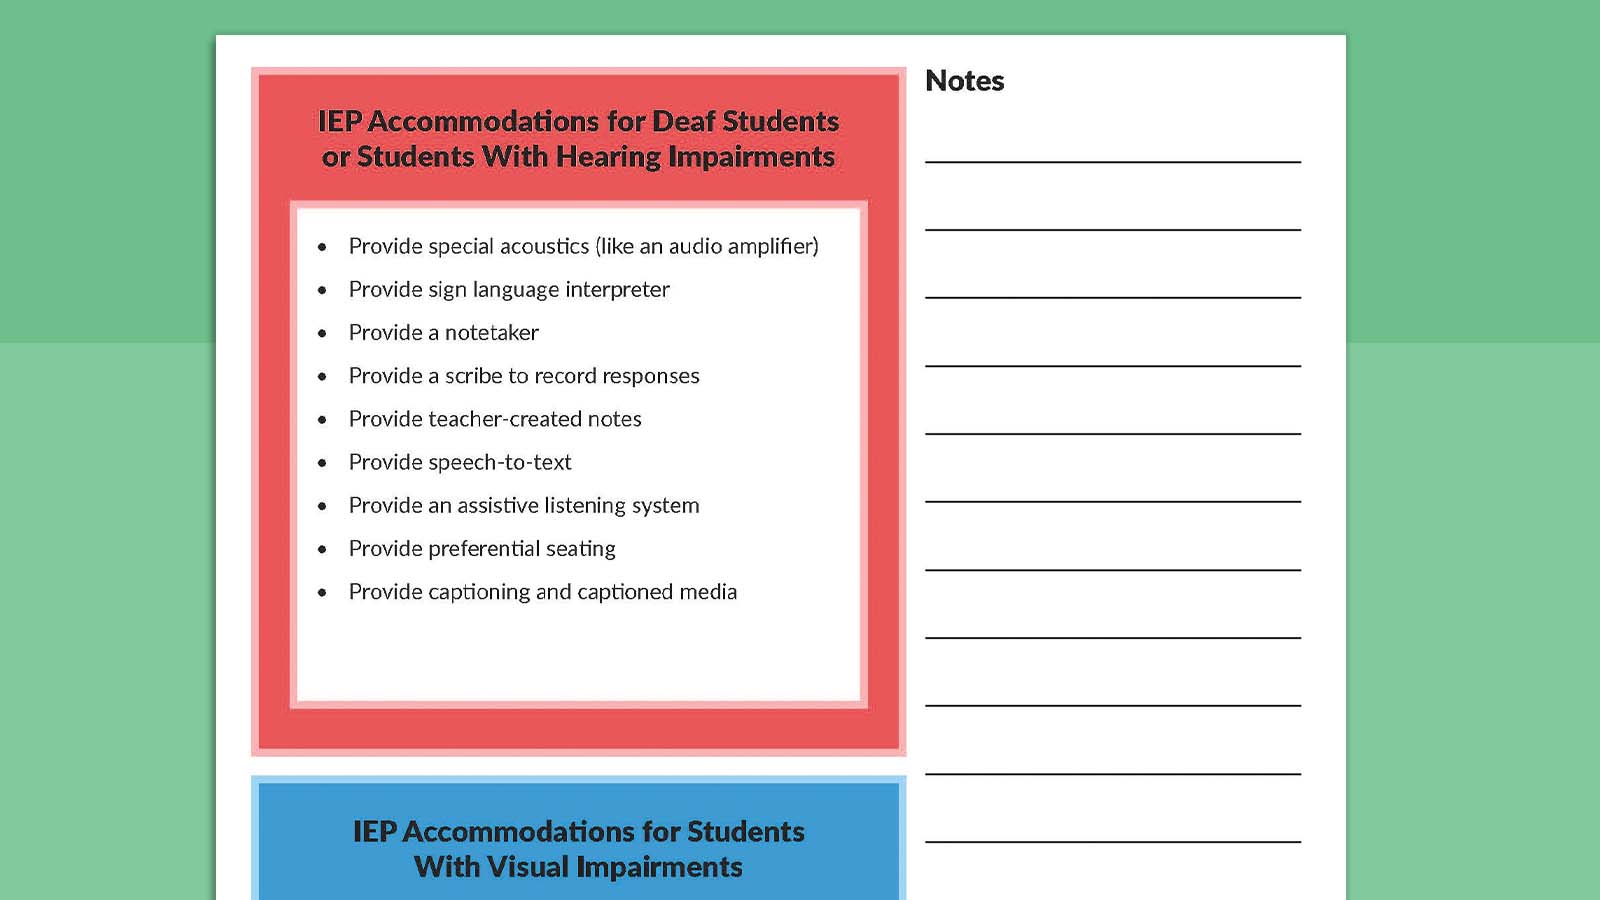 Printable sheet listing IEP accommodations for students with visual and hearing impairments.